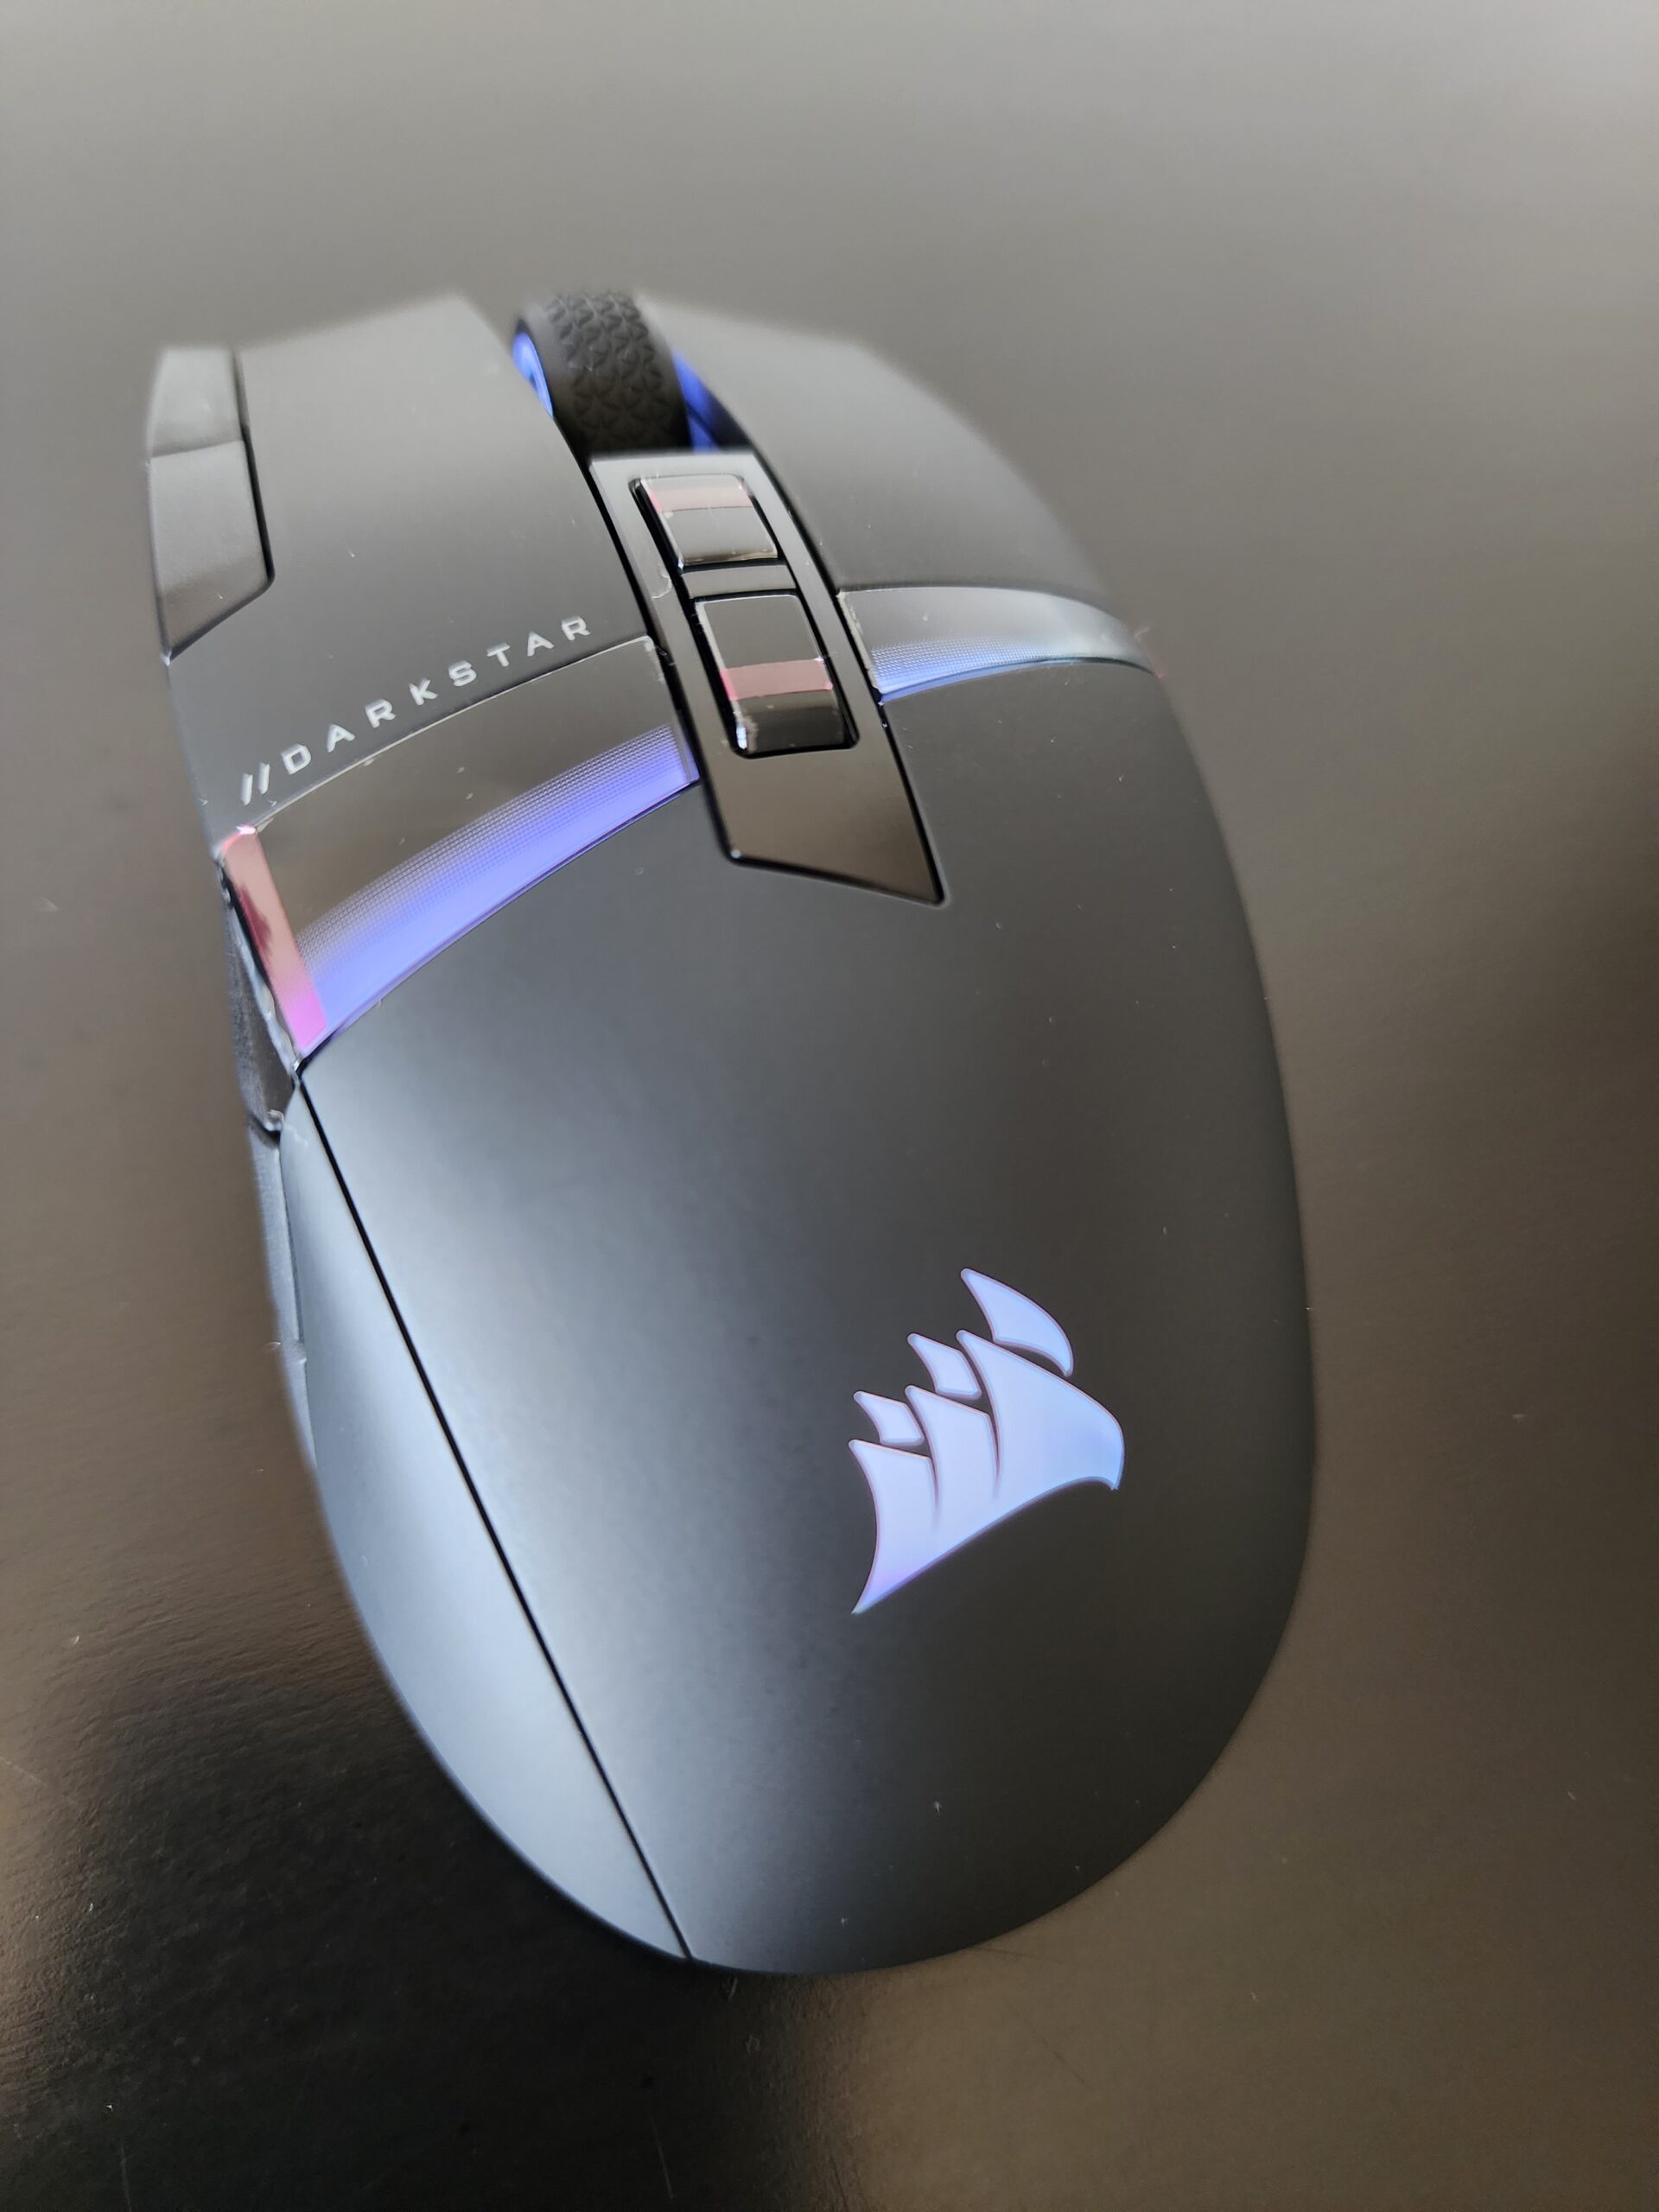 Corsair Darkstar Wireless Gaming Mouse Review